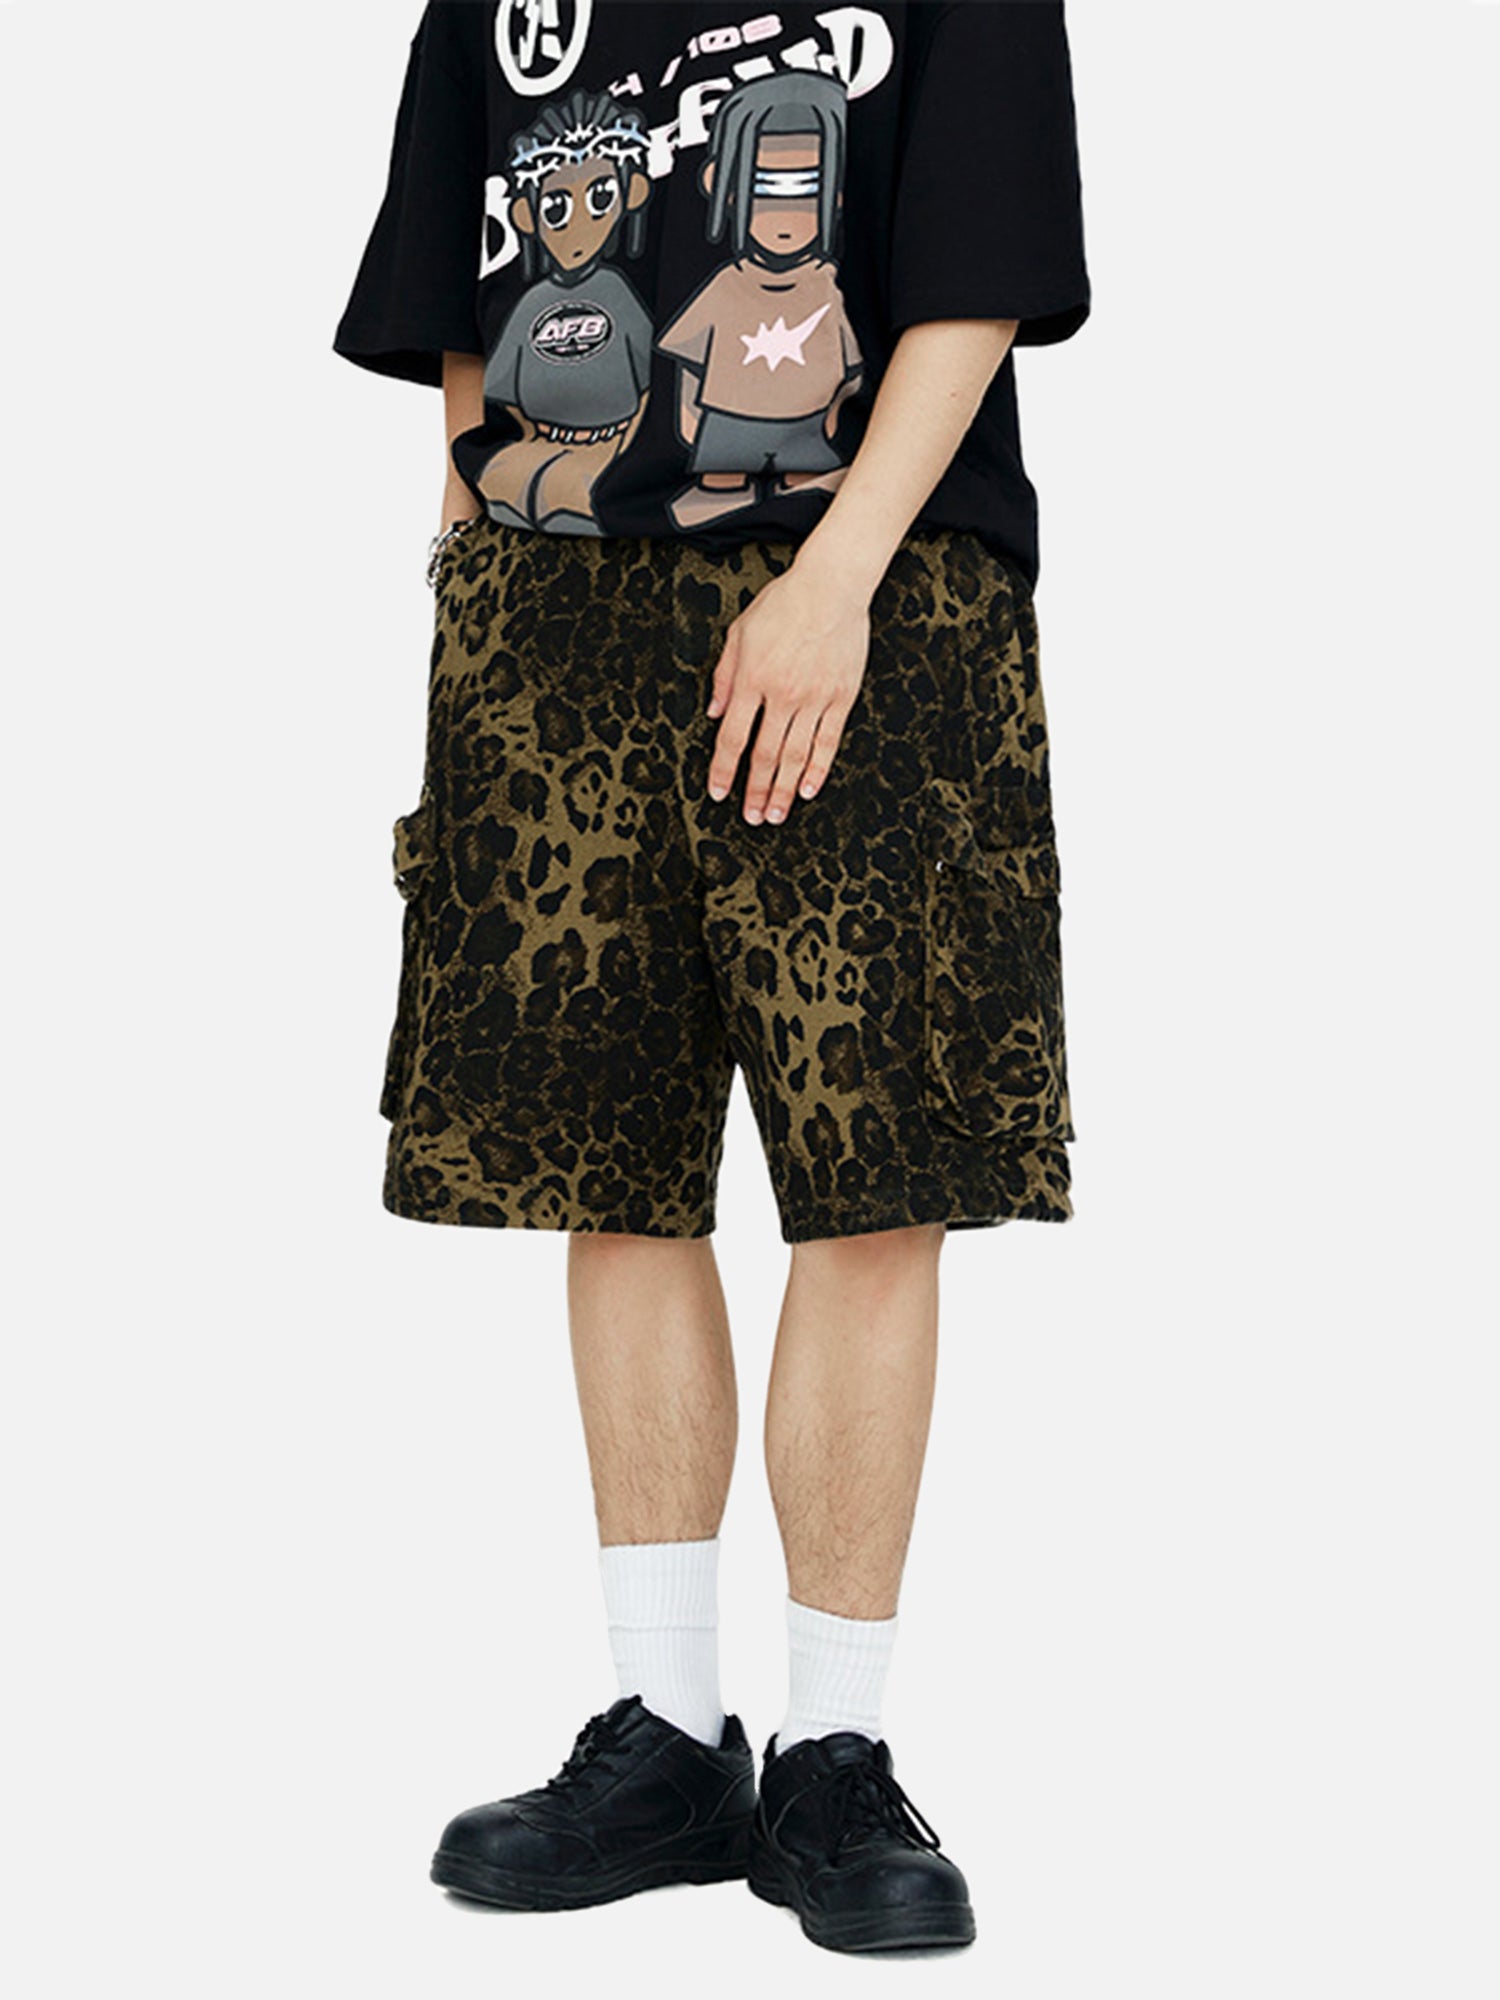 Thesupermade American Street Fashion Leopard Print Shorts